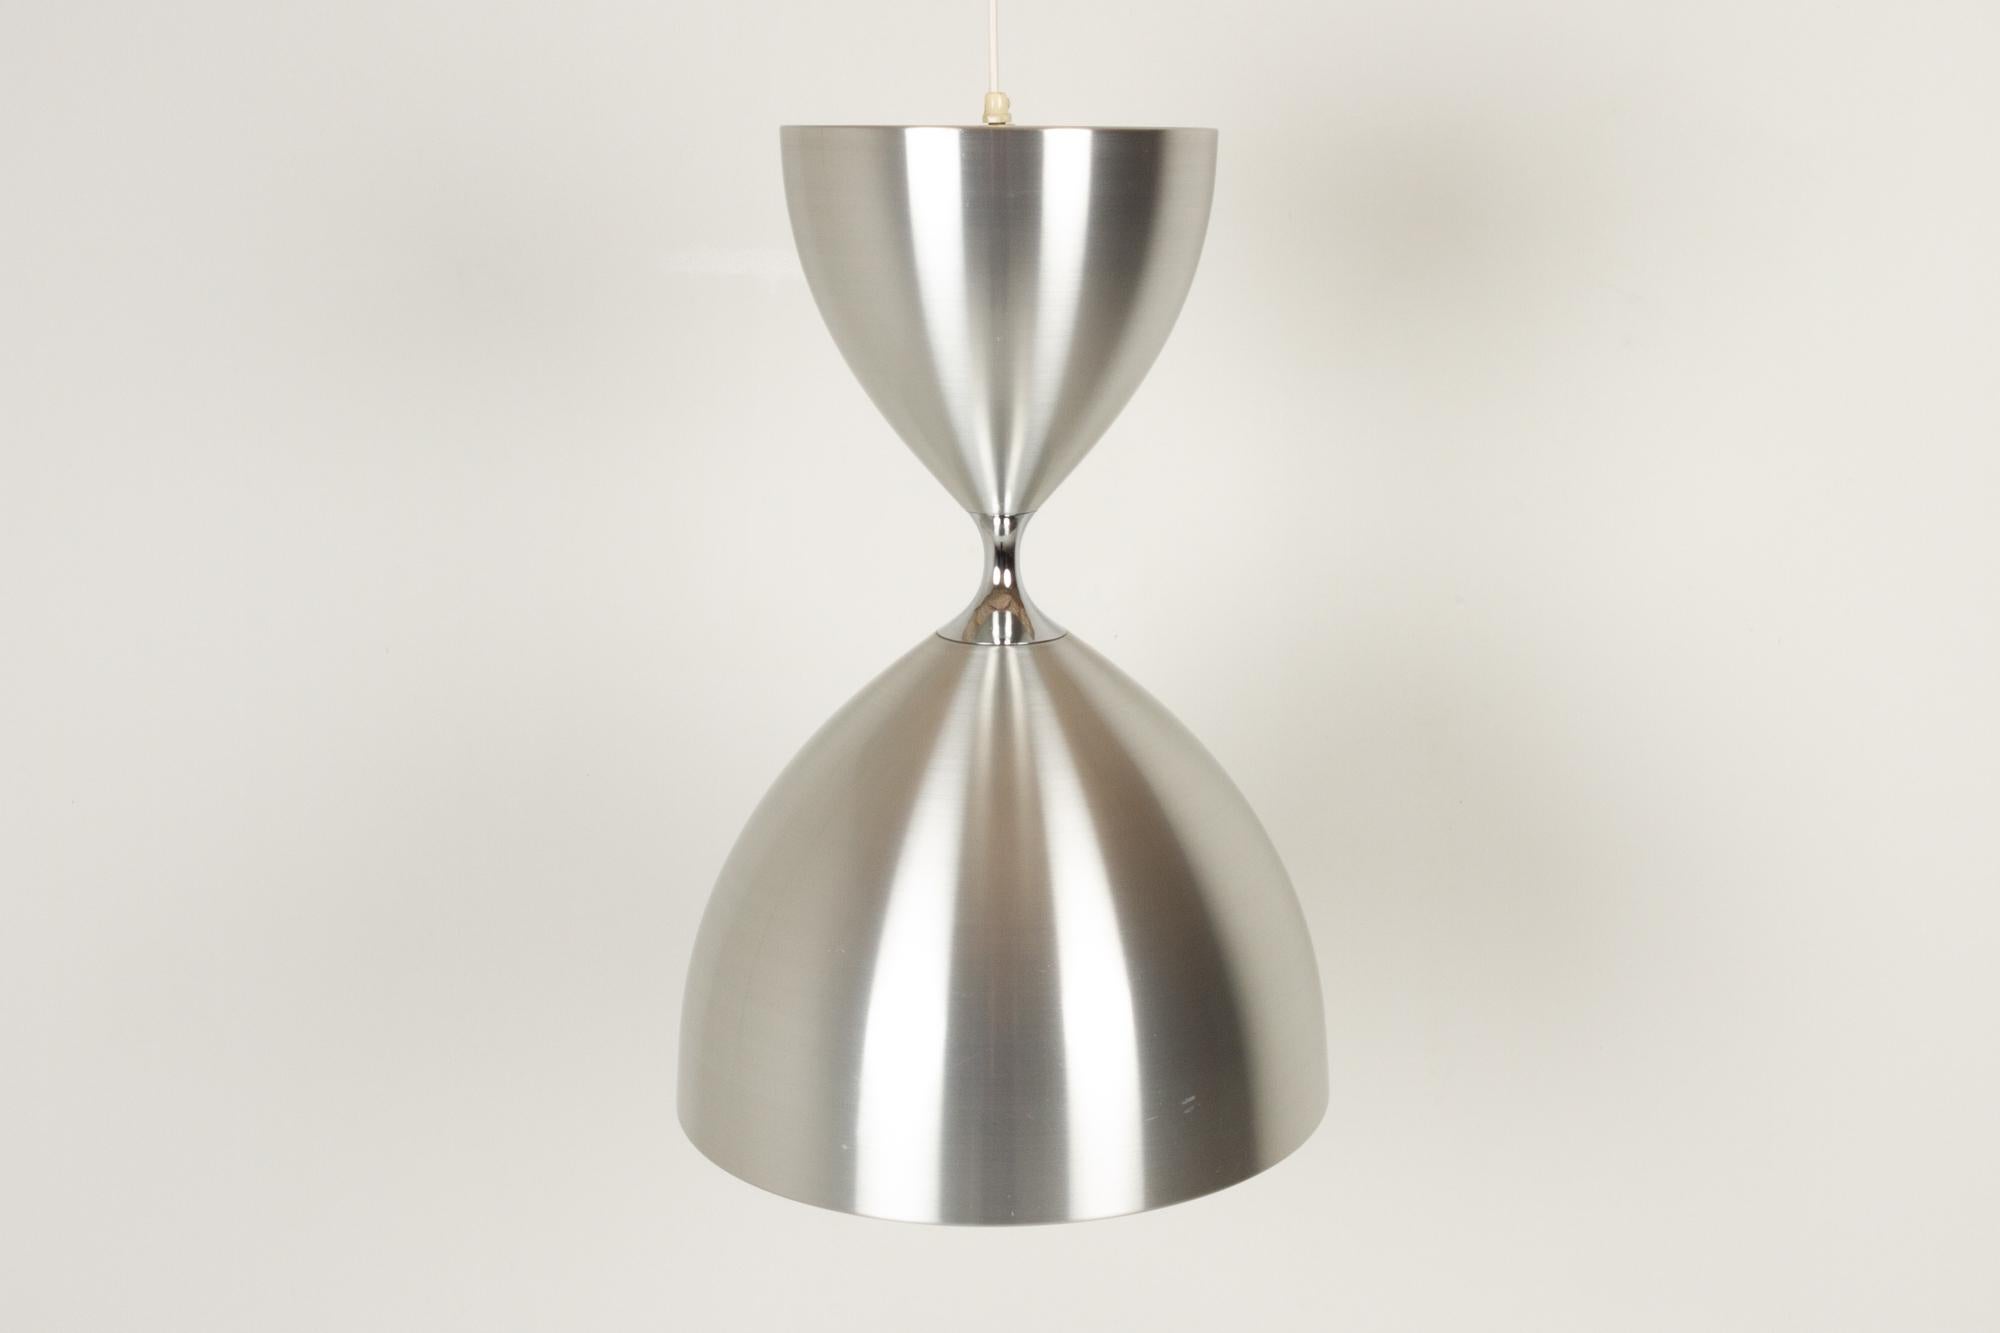 Vintage Danish Vega ceiling pendant by Jo Hammerborg for Fog & Mørup, 1960s.
Iconic Danish modern lighting design by Danish designer Jo Hammerborg. Large hourglass shaped ceiling lamp in brushed aluminium with dual function. Upward light in the top